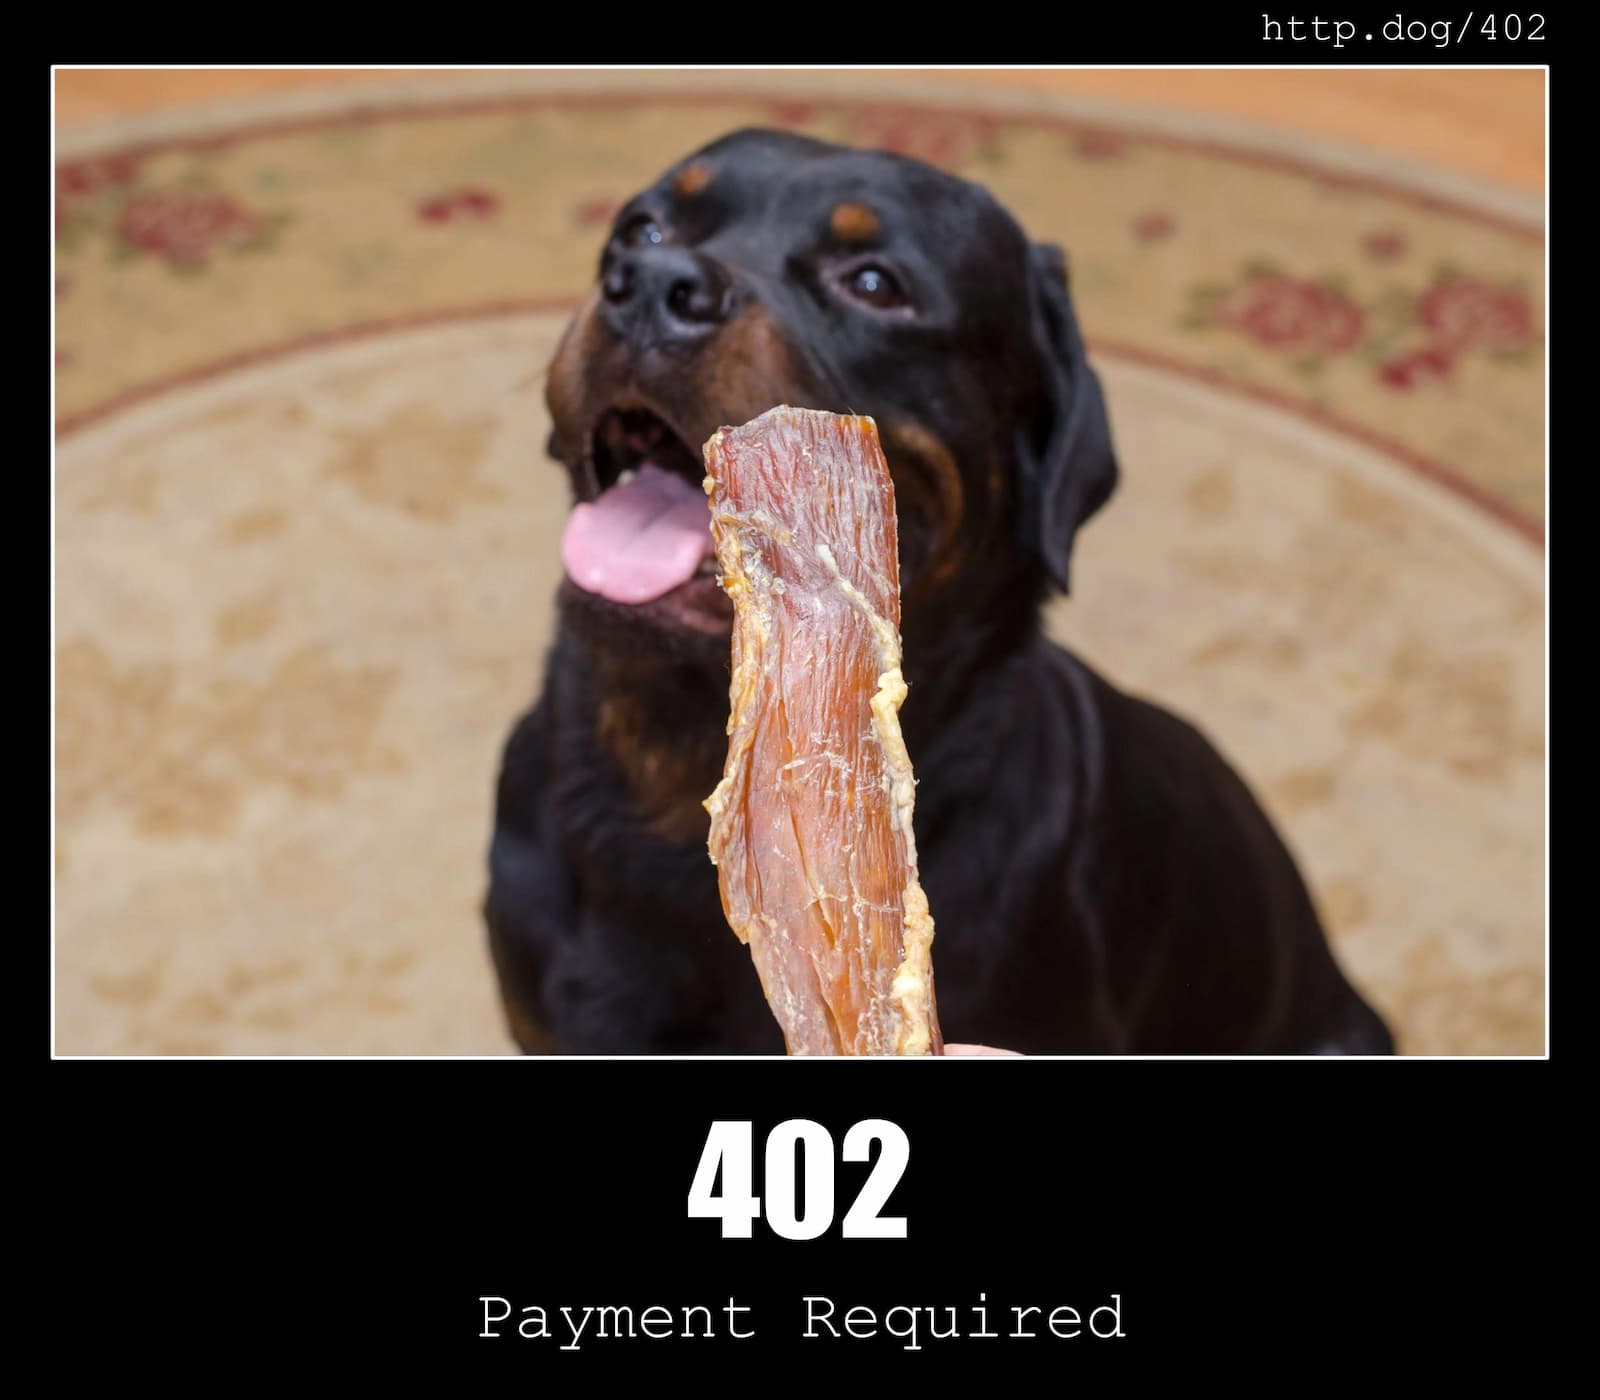 HTTP Status Code 402 Payment Required & Dogs